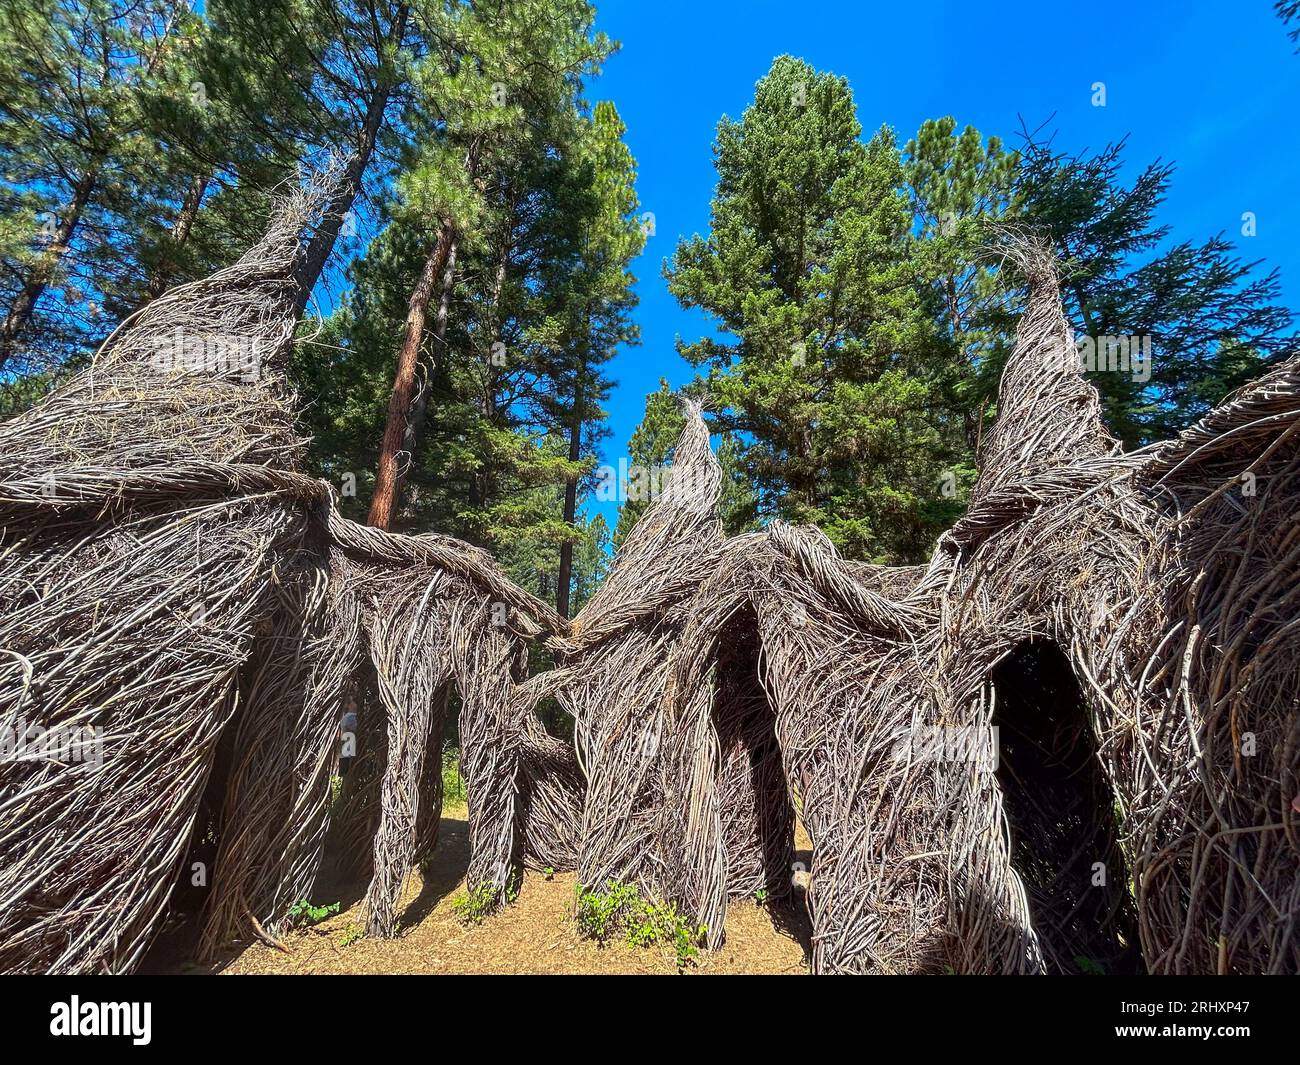 Artist Patrick Dougherty’s “Tree Circus” amid ponderosa pine trees at the Blackfoot Pathways: Sculpture in the Wild in Lincoln, Montana. Stock Photo